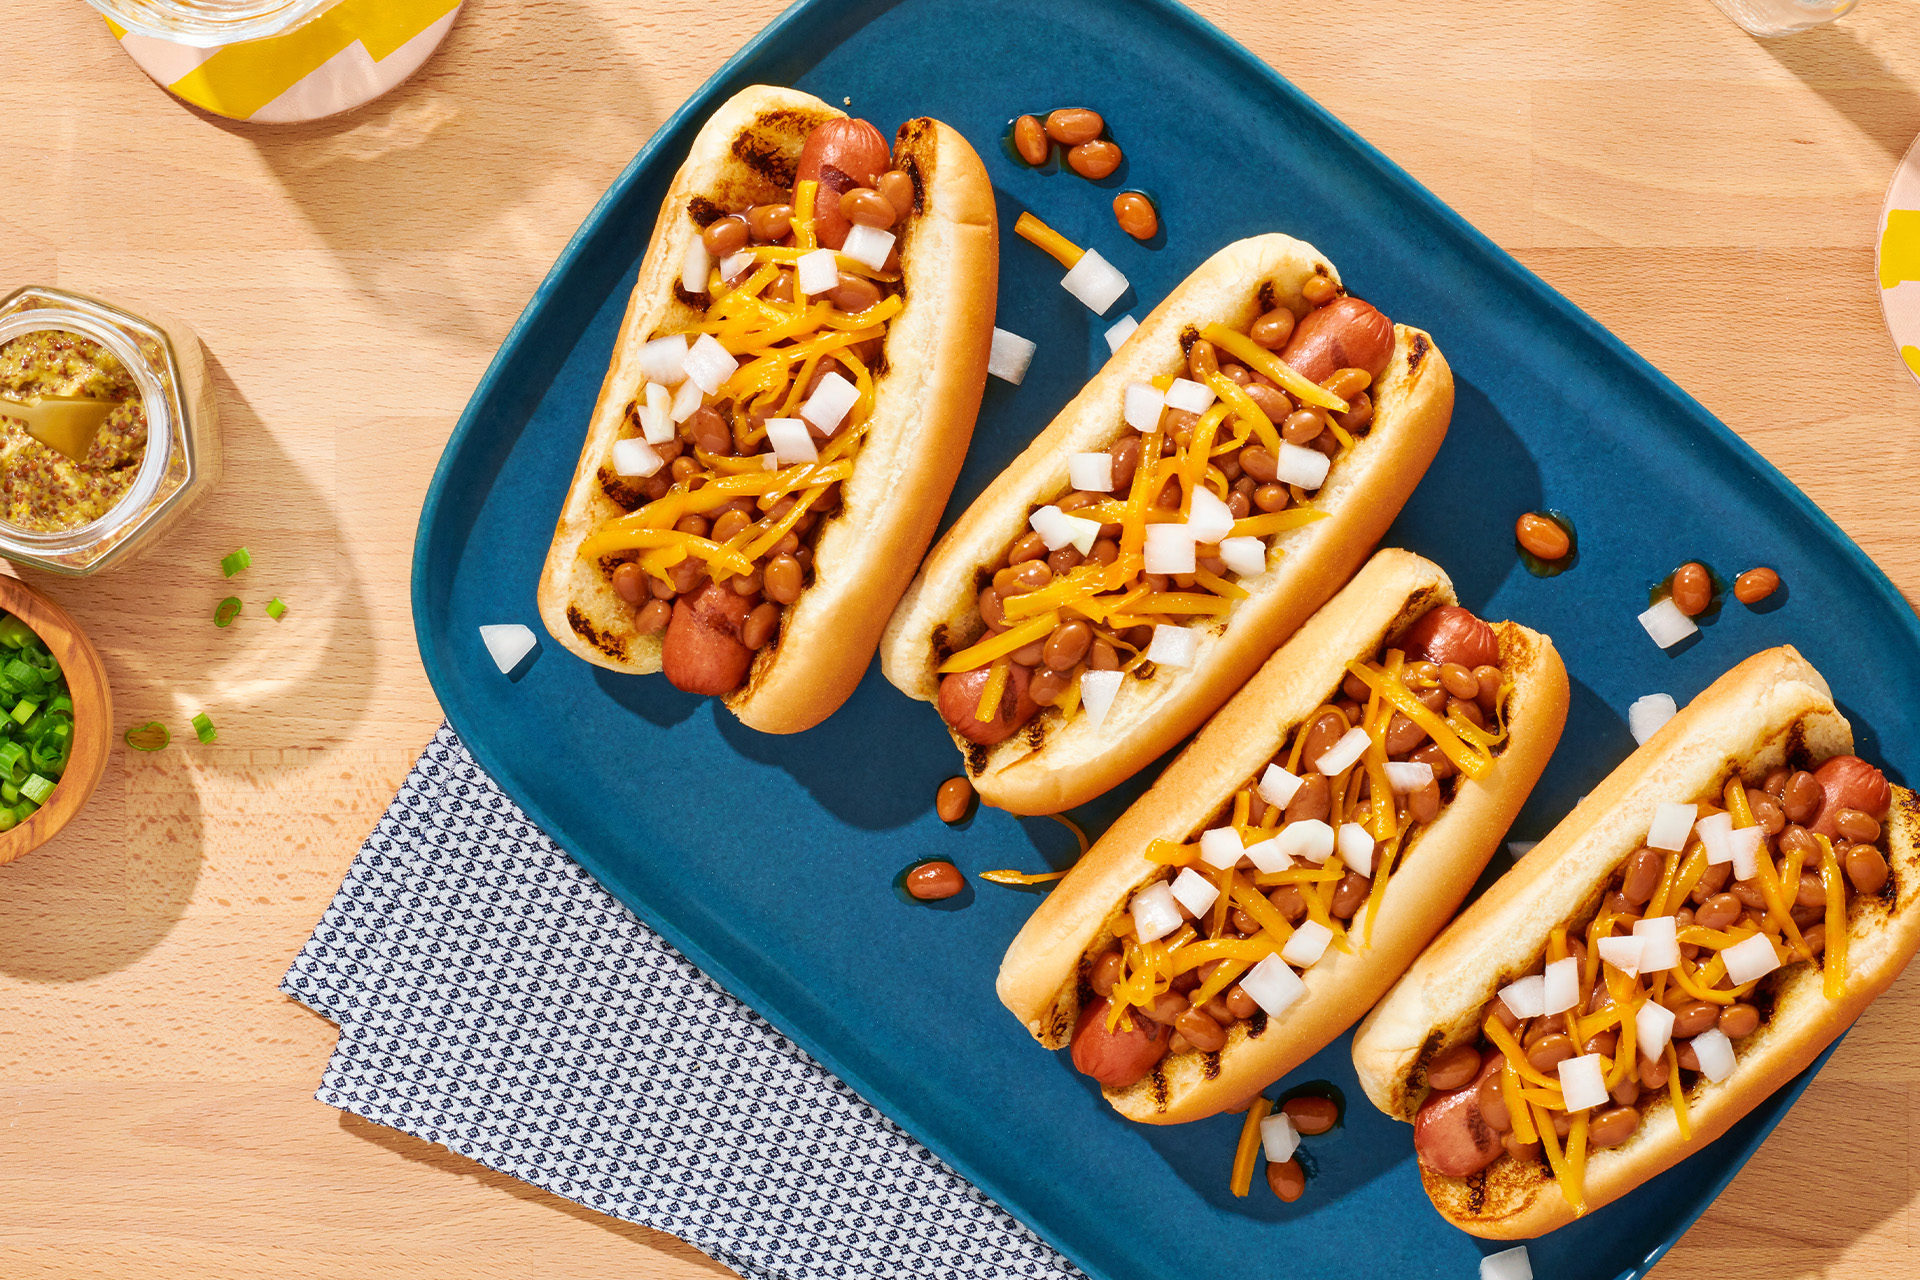 Bean And Hot Dog Recipe : Quick Skillet Baked Beans And Franks Recipe Myrecipes